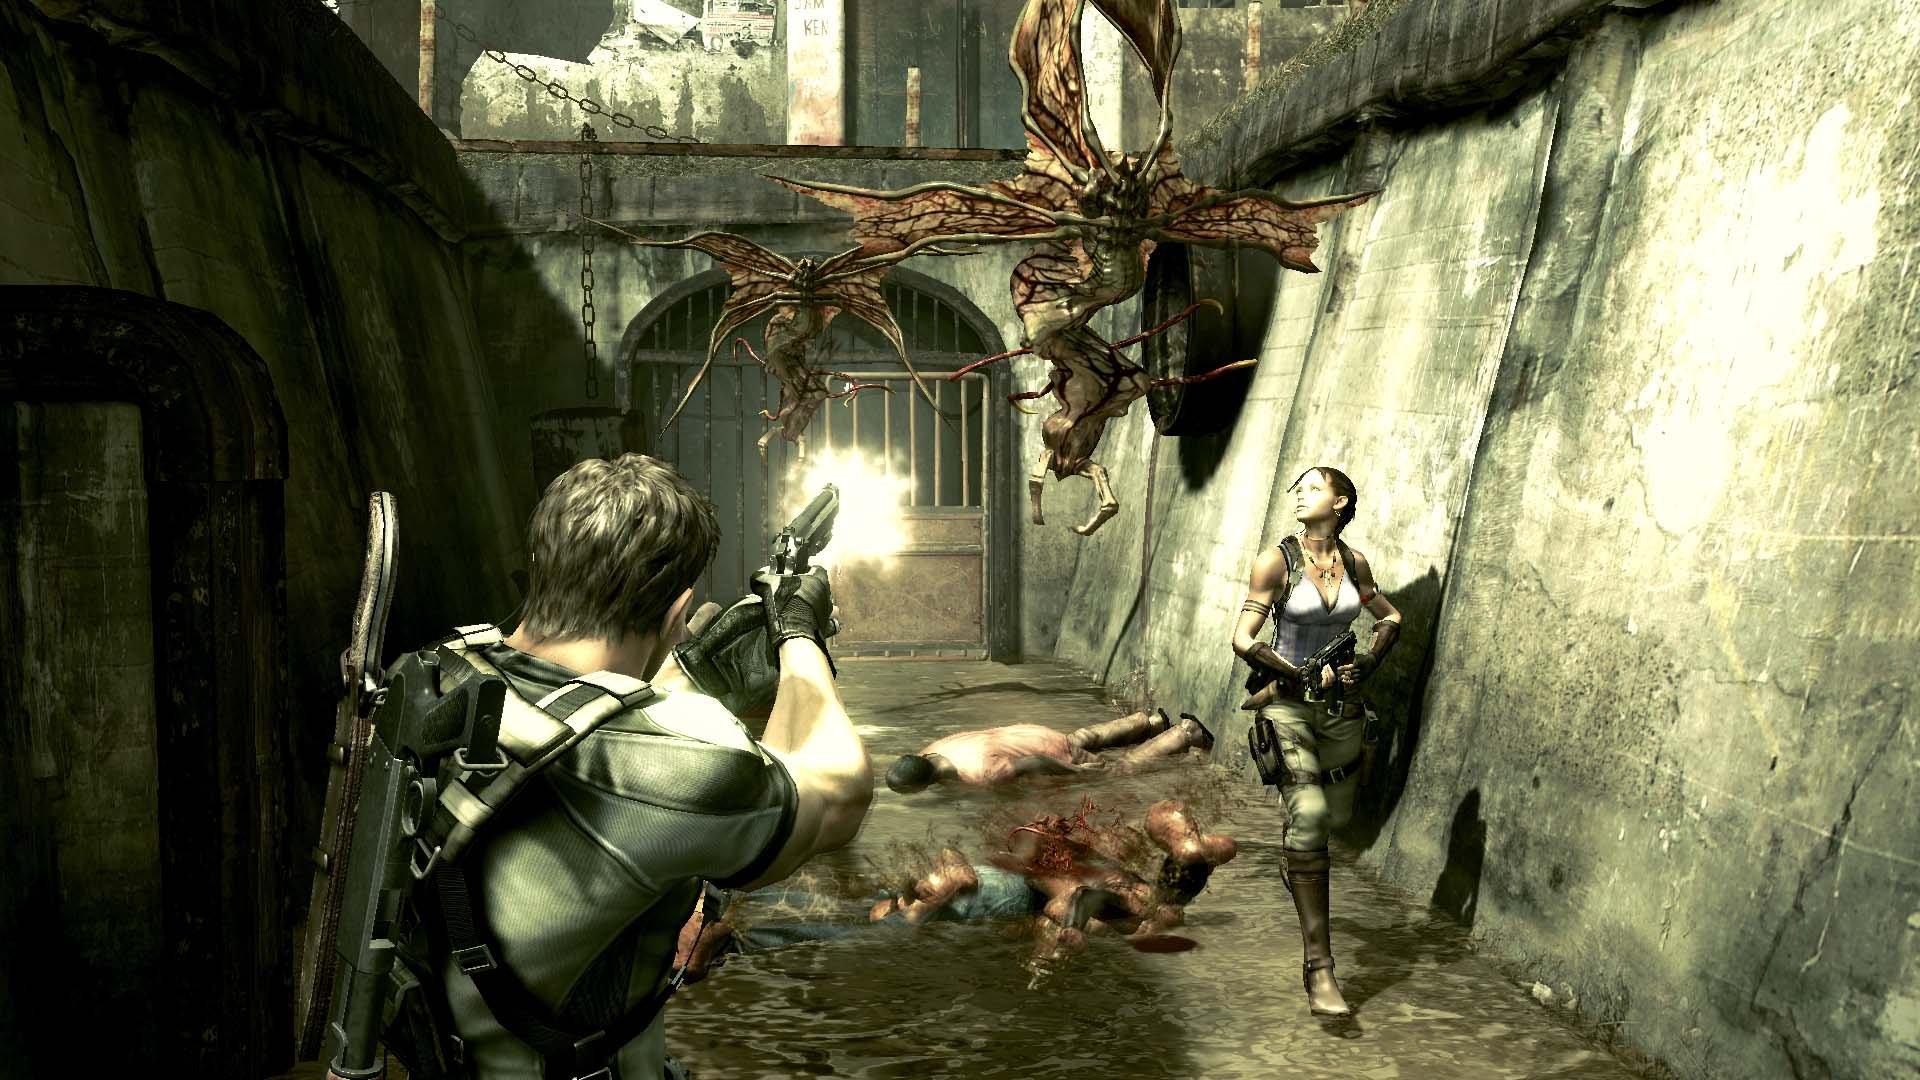 Characters - Models and Reskins - Resident Evil 5 - Characters models and  reskins for Resident Evil 5